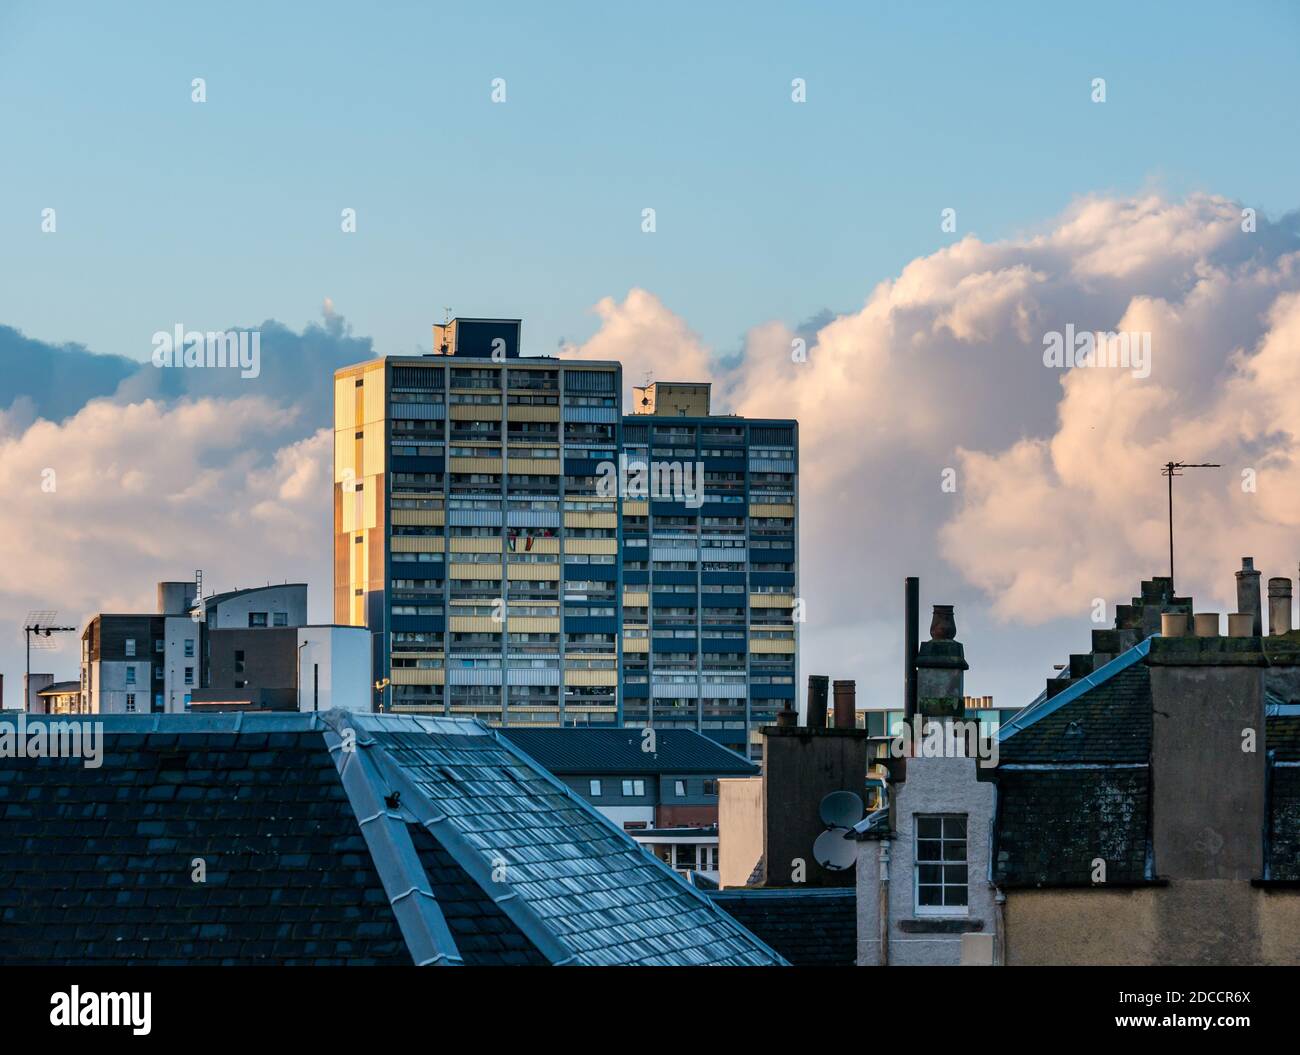 Council tower block of flats towering over rooftops with puffy clouds, Leith, Edinburgh, Scotland, UK Stock Photo